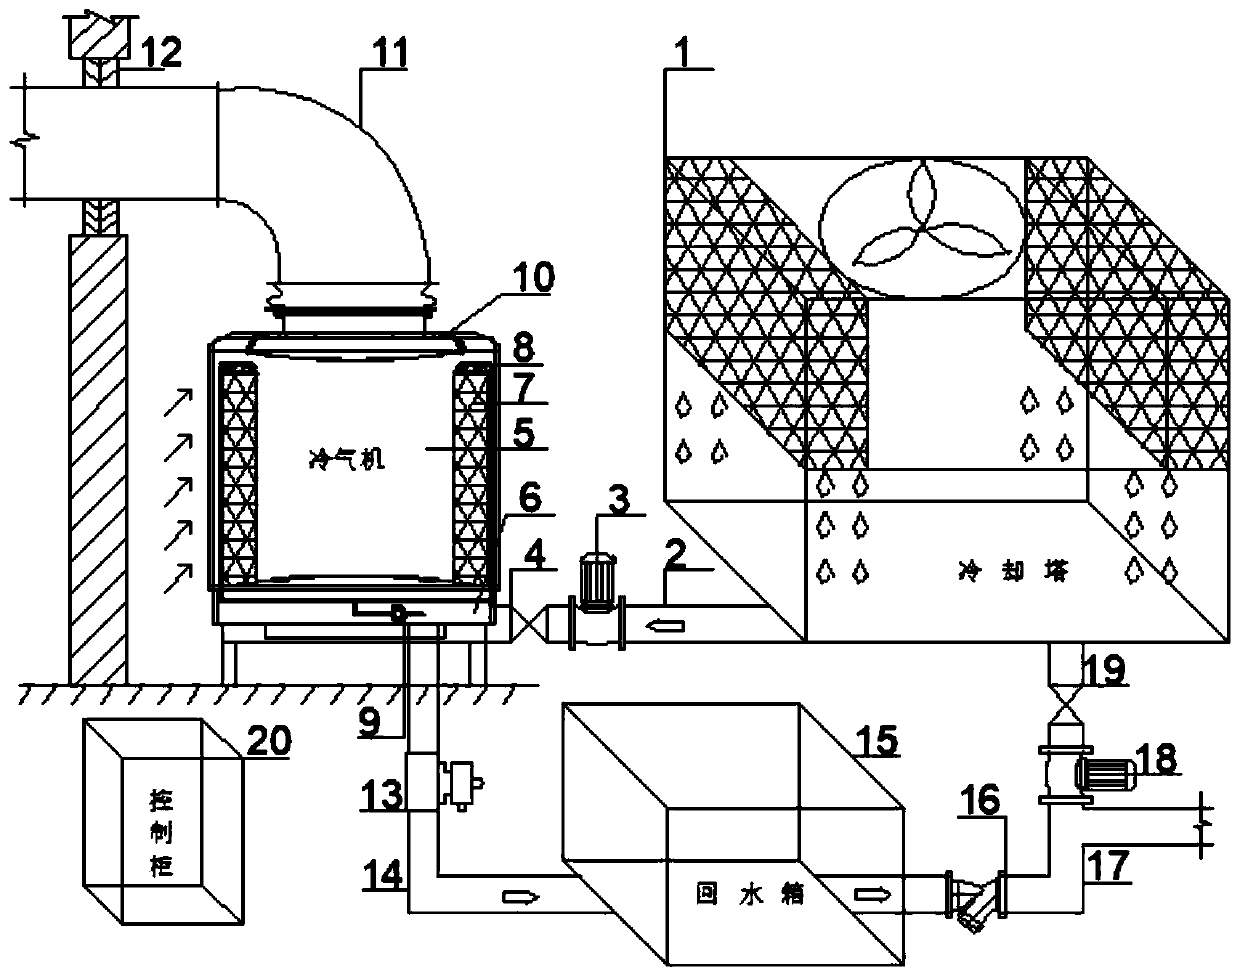 Water supply and return system through combination of evaporative air cooler and cooling tower